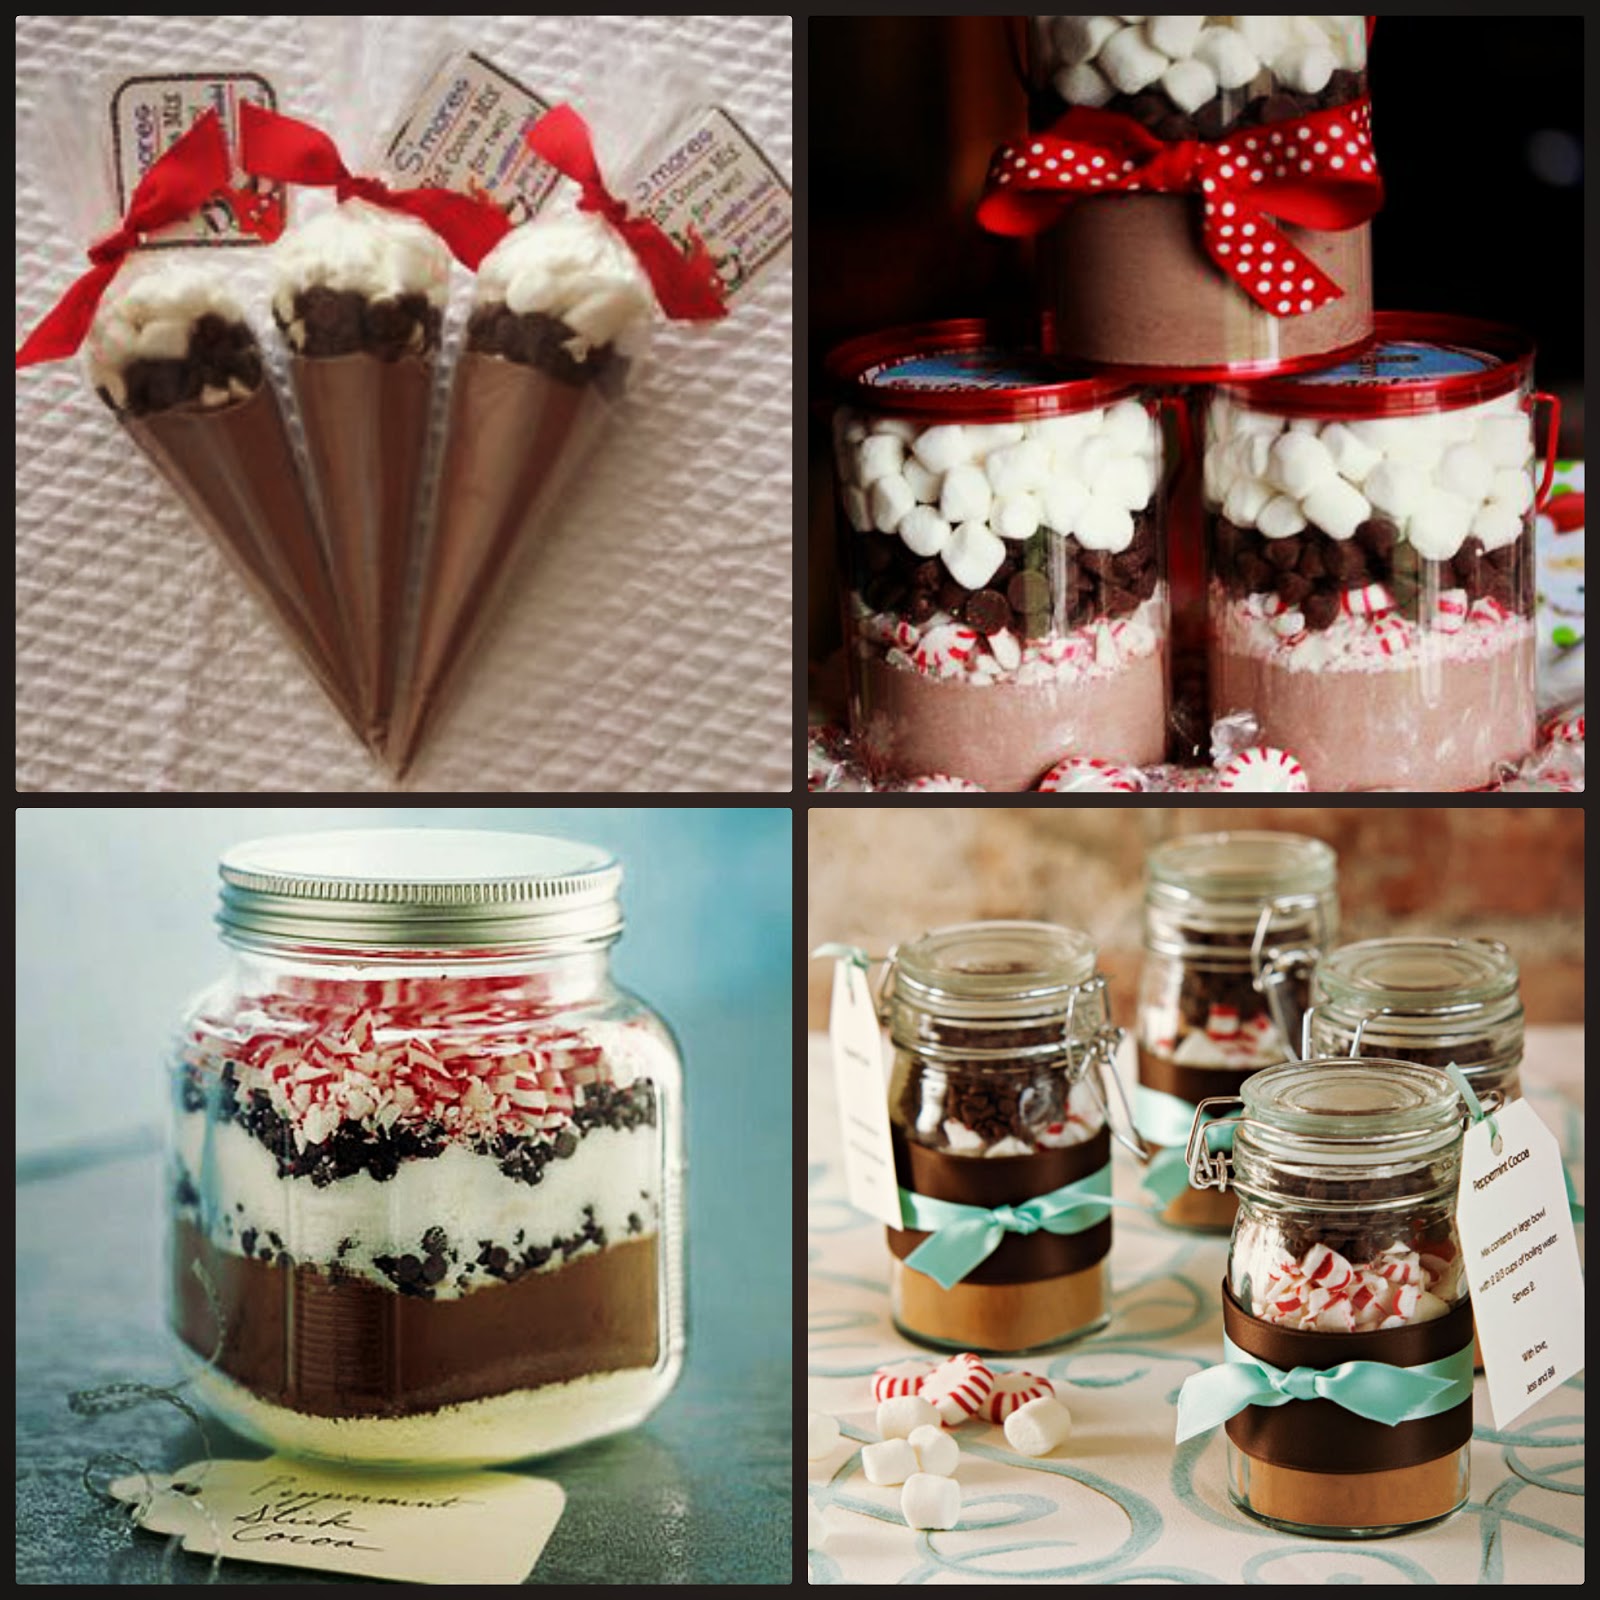 Screwdrivers and Stethoscopes {25 Days of Christmas} DIY Hot Cocoa Gifts